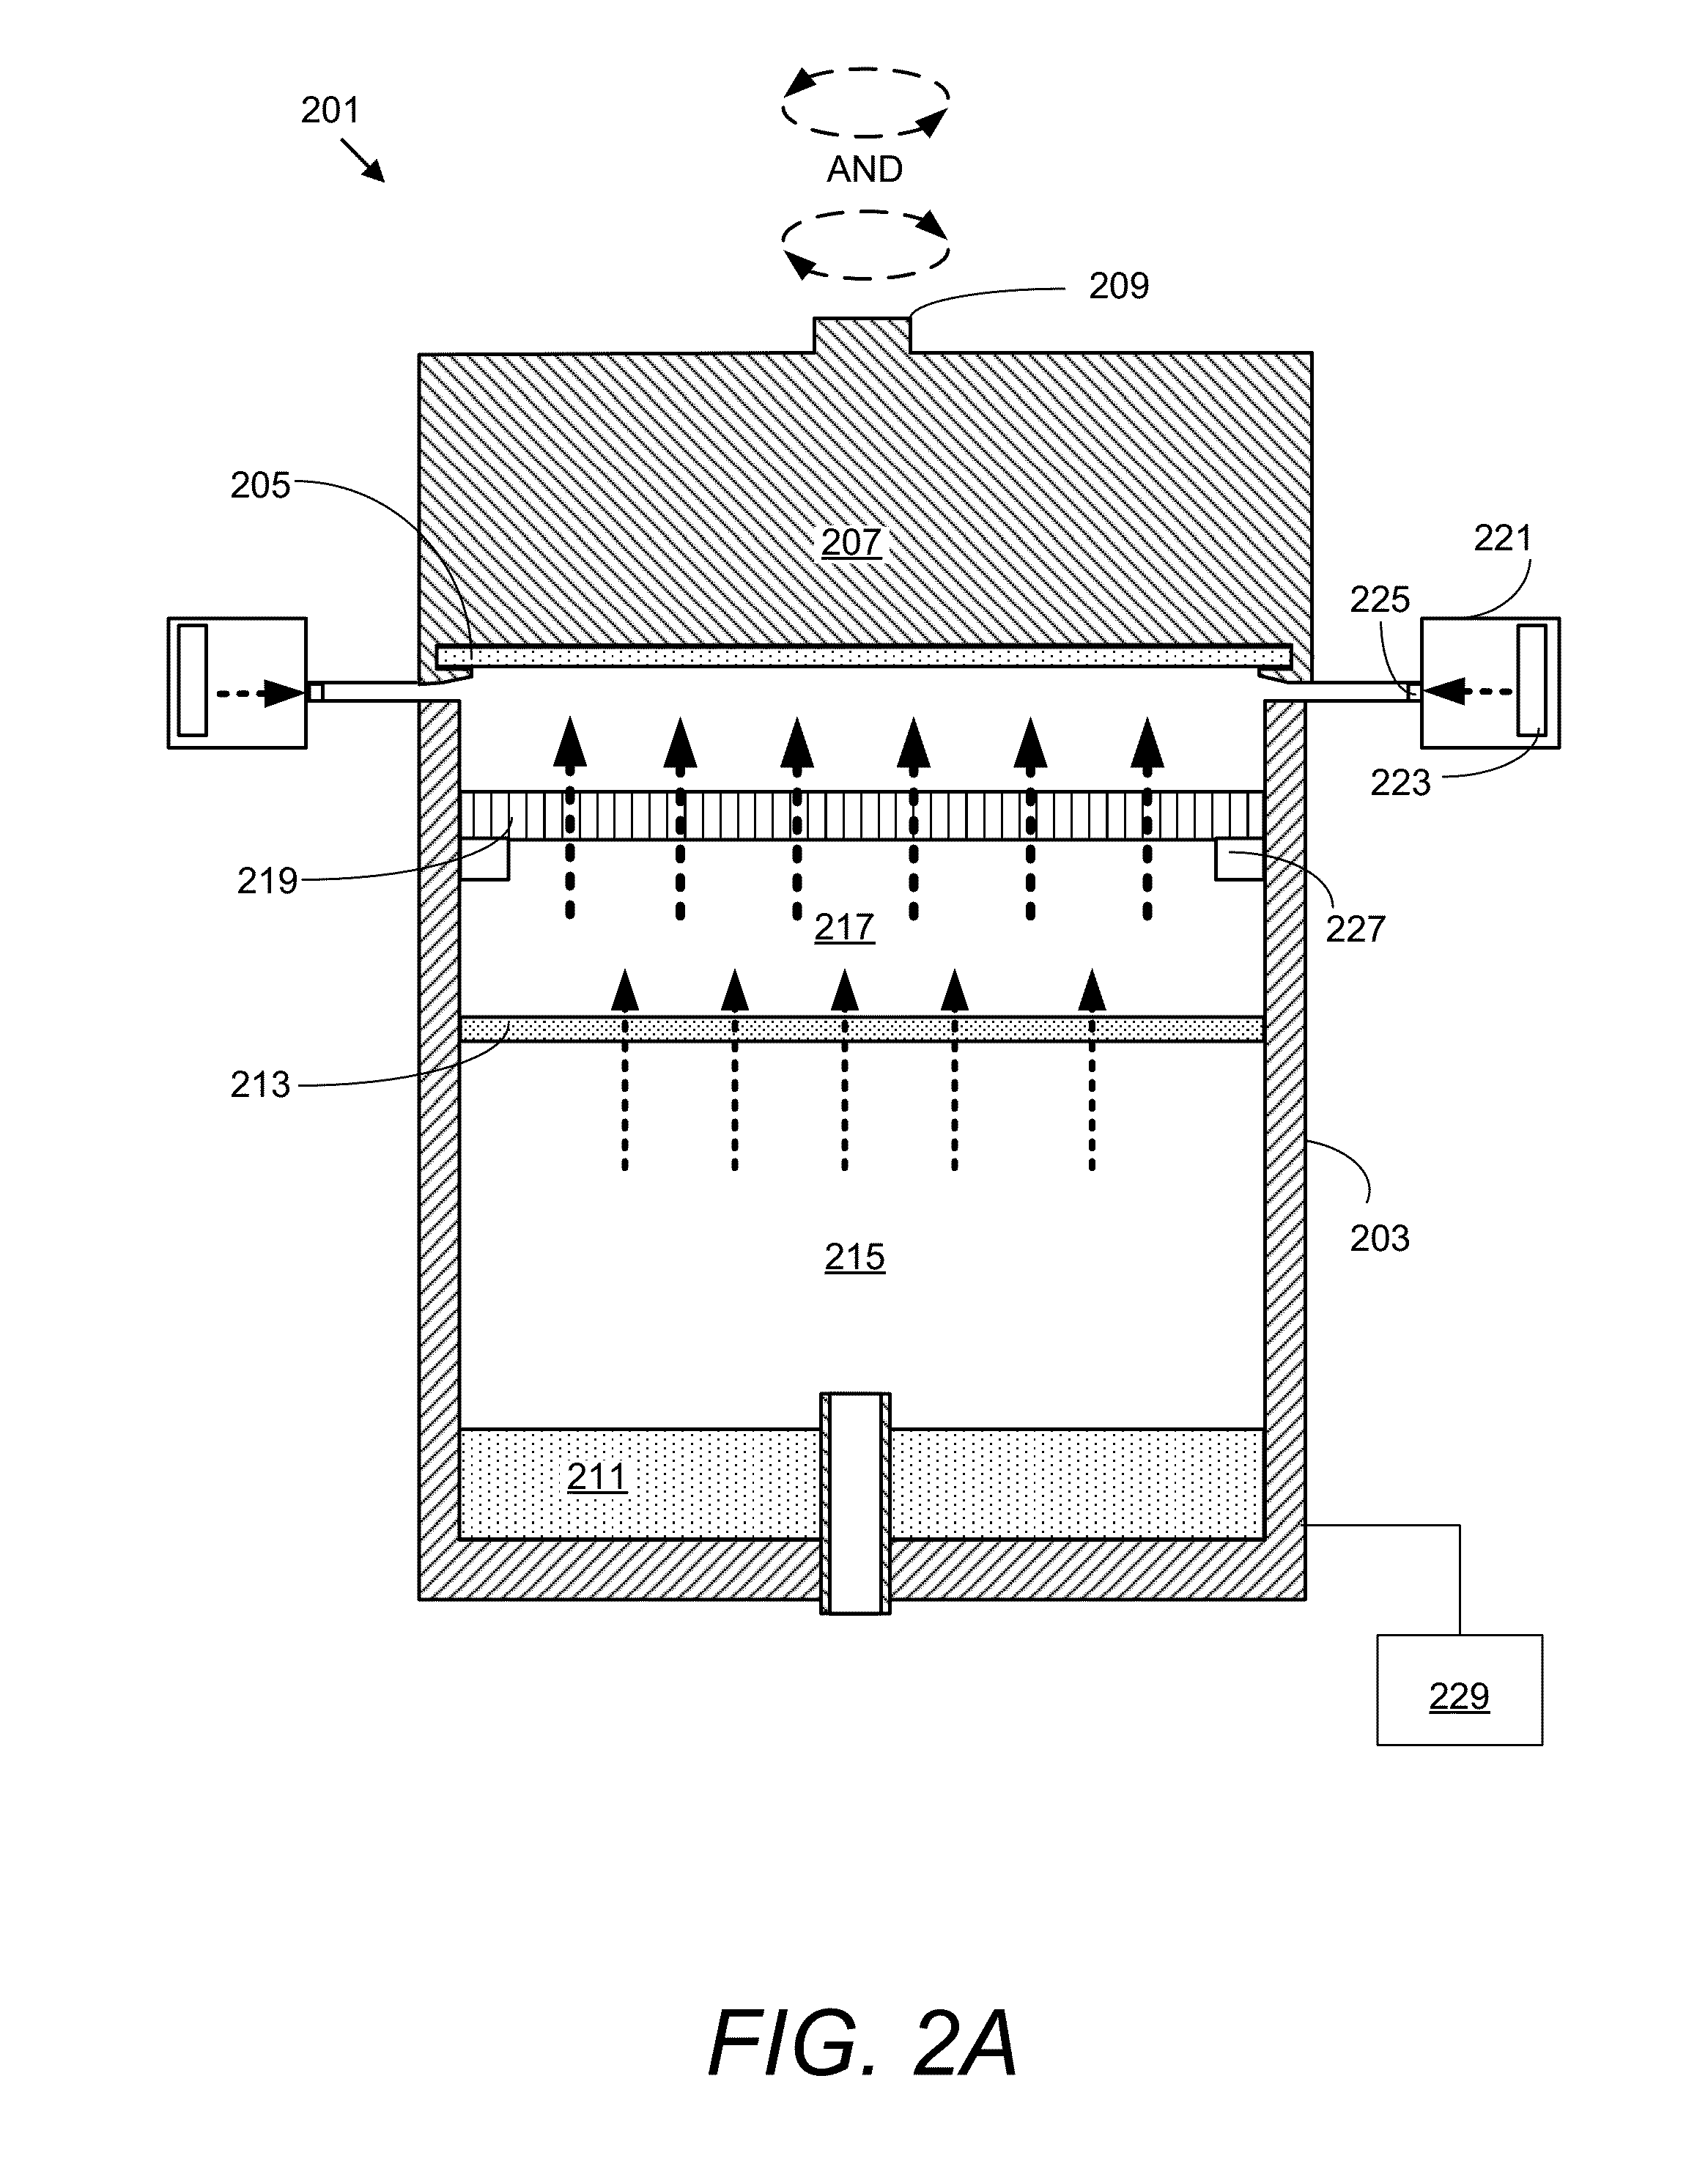 Apparatus and method for dynamic control of plated uniformity with the use of remote electric current